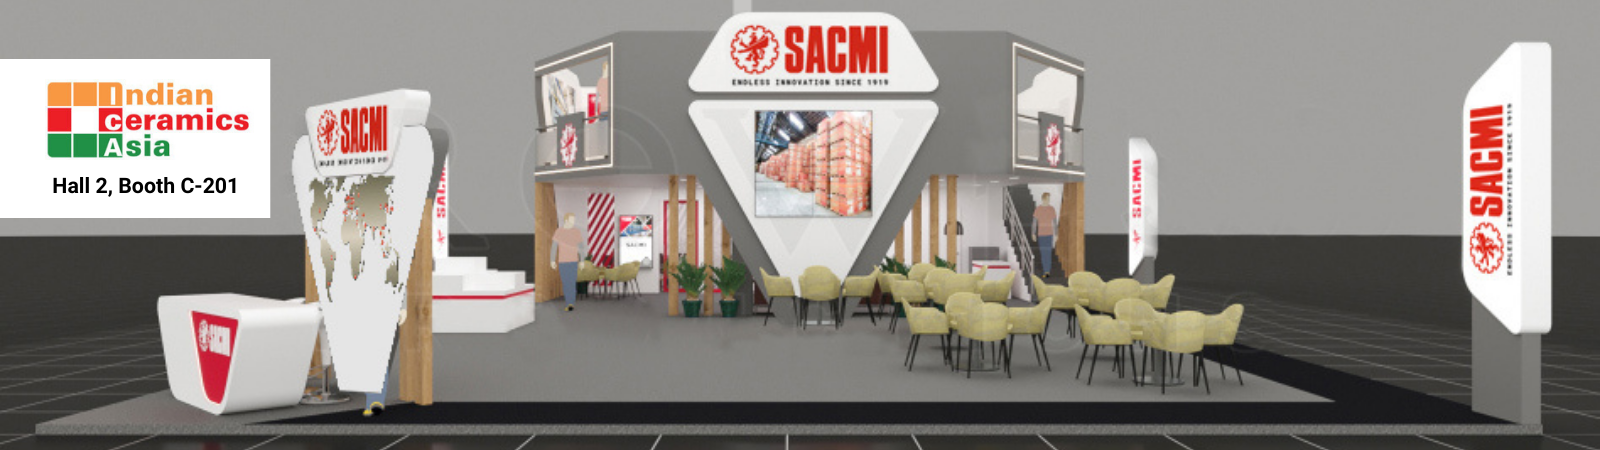 Indian Ceramics is back (6-8 April 2022), with SACMI quality, versatility and energy-saving solutions set to play a central role